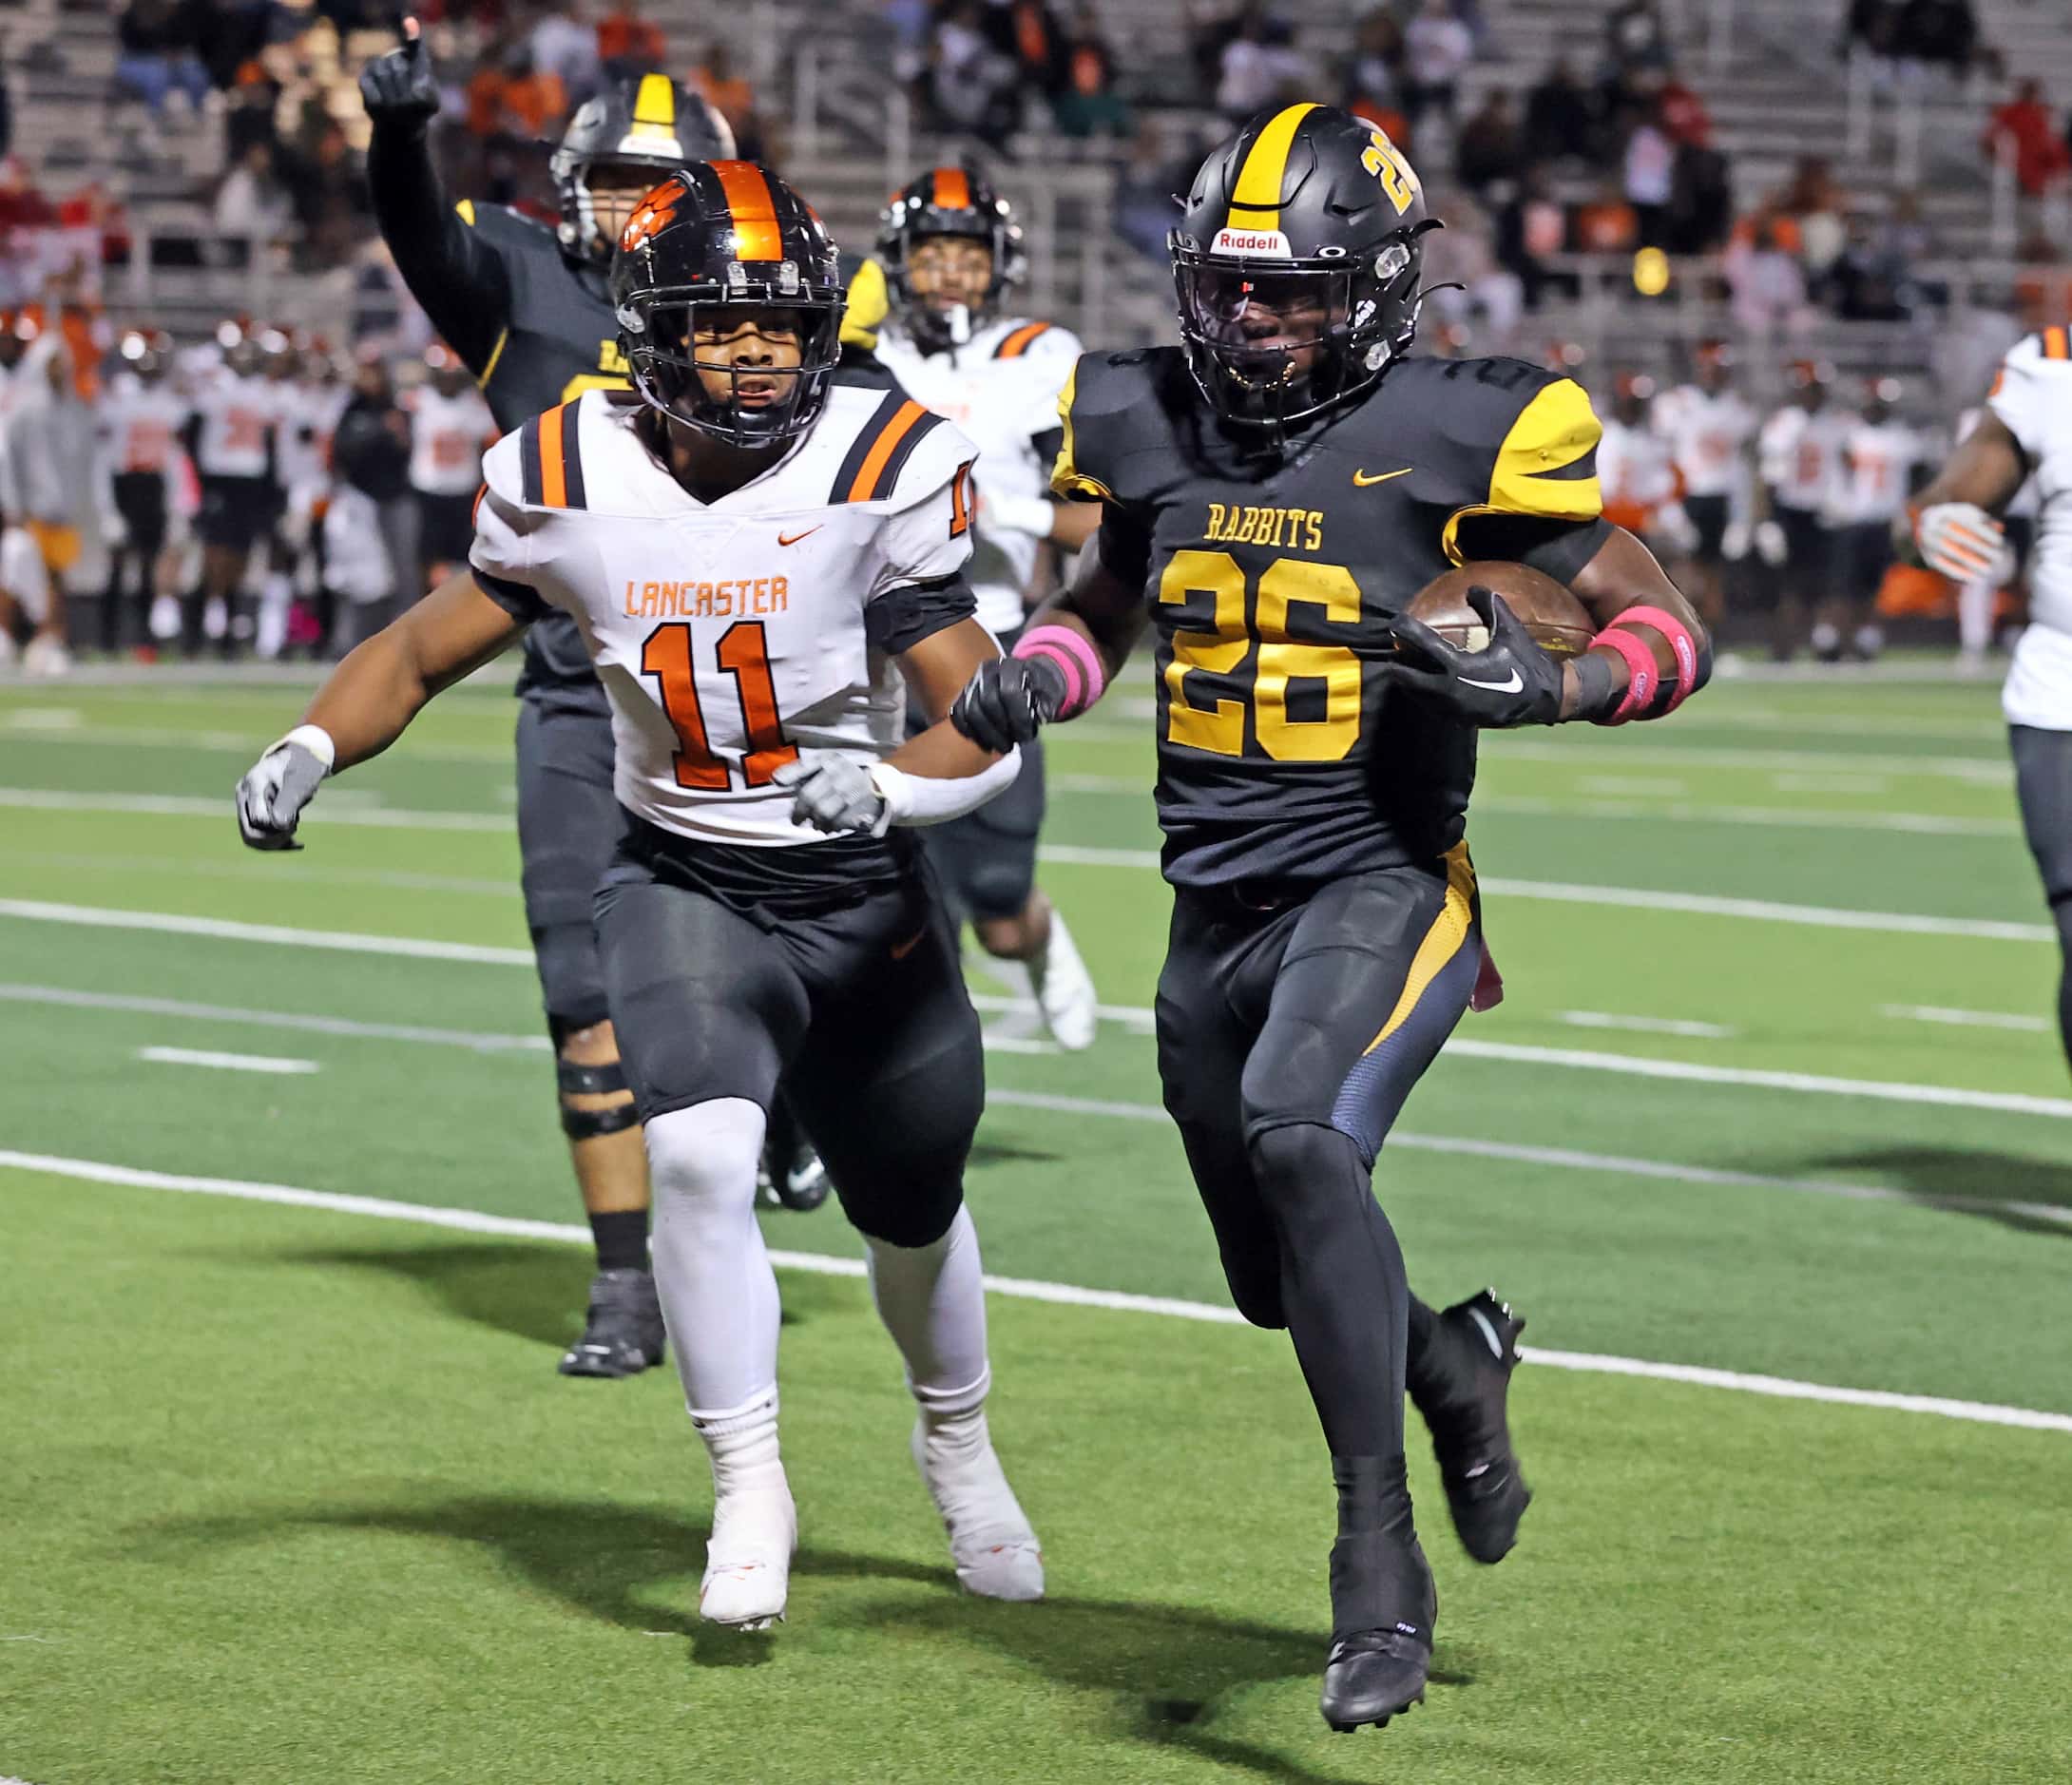 Forney High’s Javian Osborne (26) gats past Lancaster high’s DaVon Berry (11) and heads to...